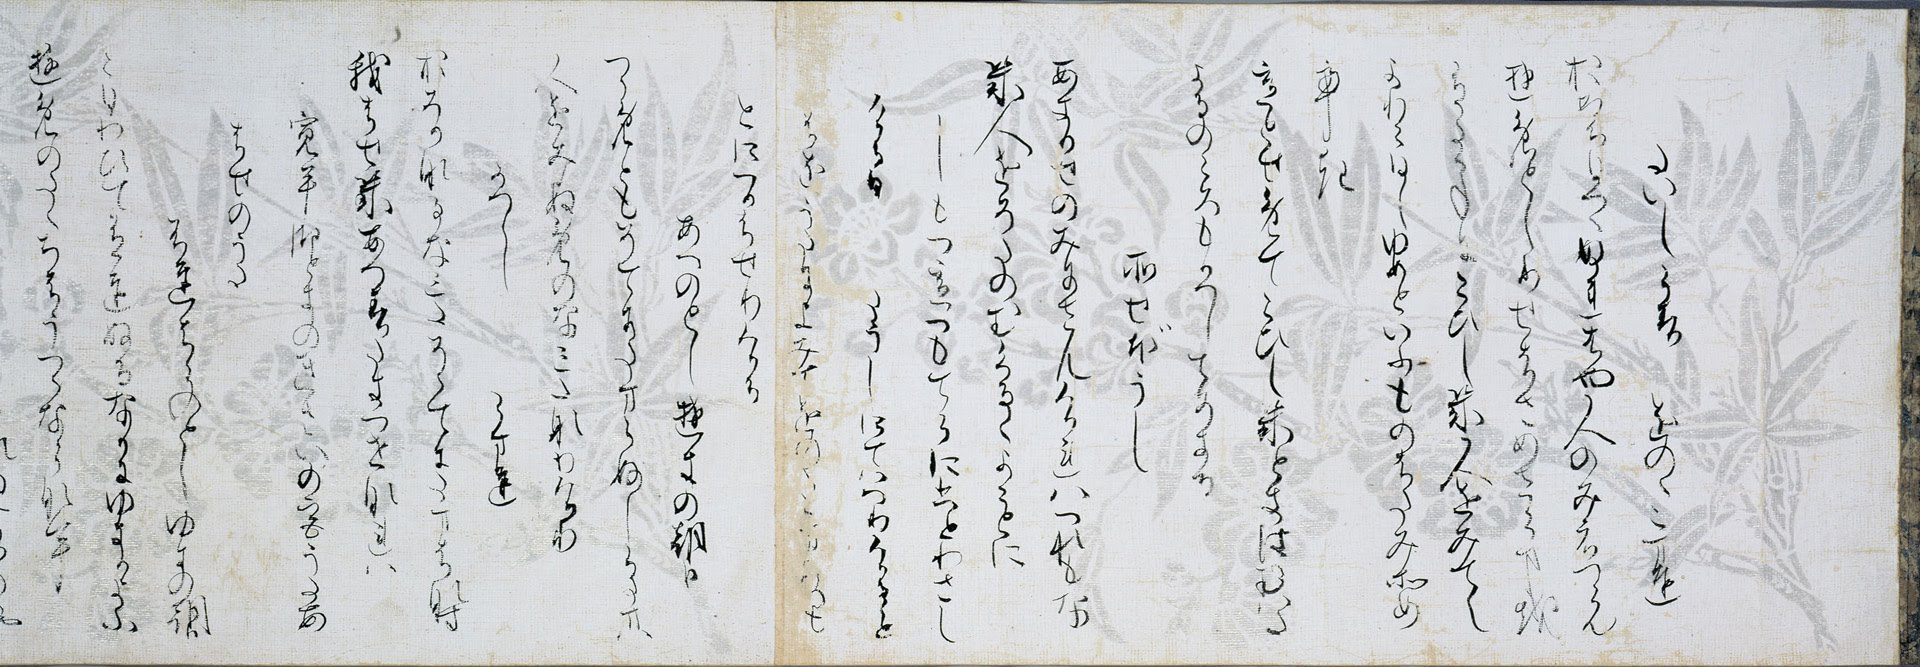 A calligrapy manuscript of the poetic anthology Kokin Wakashuu, written on white decorated paper.